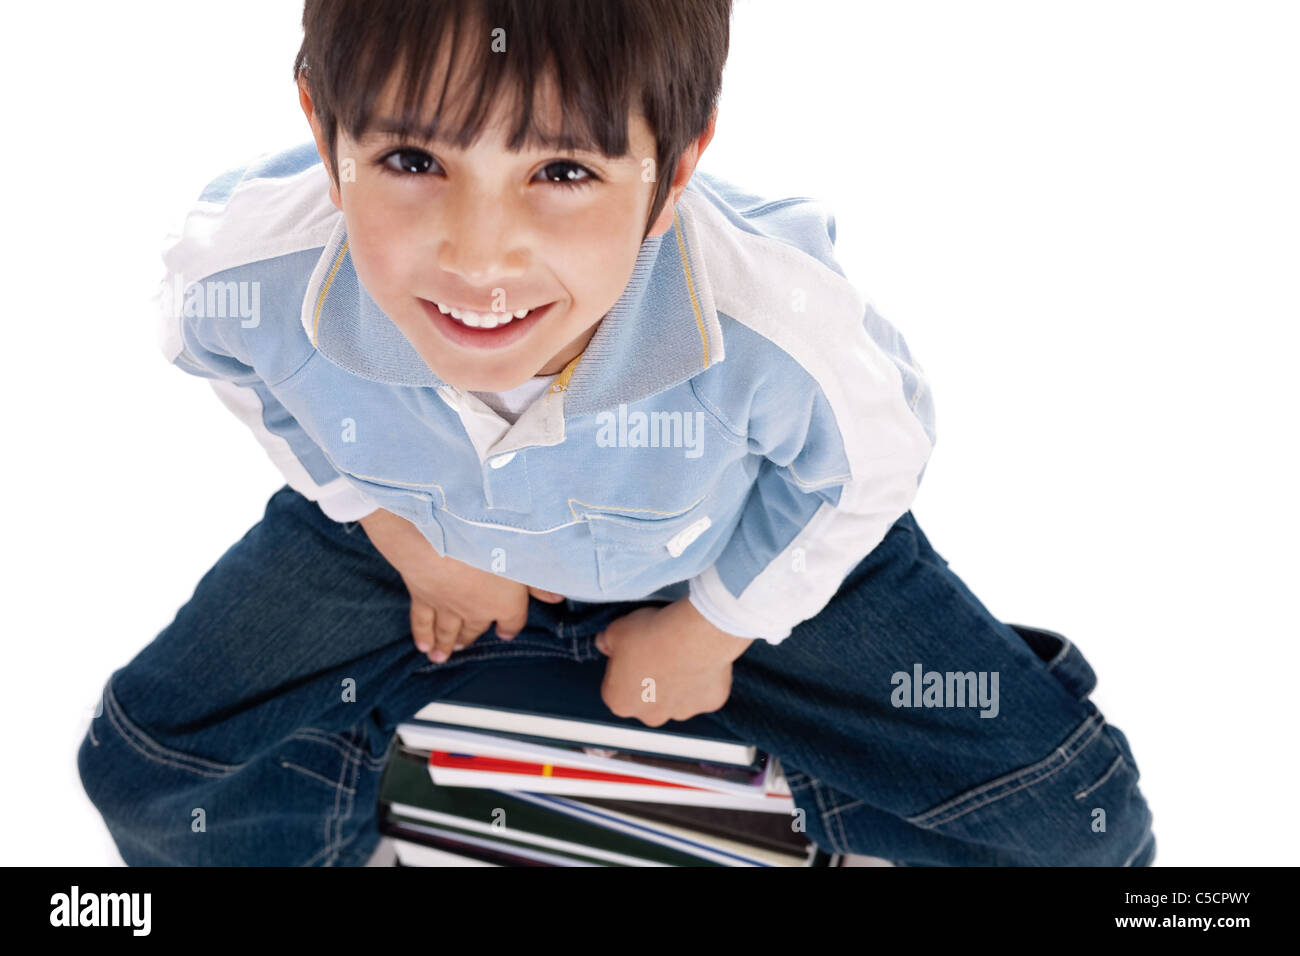 Top angle image of kid sitting on books Stock Photo